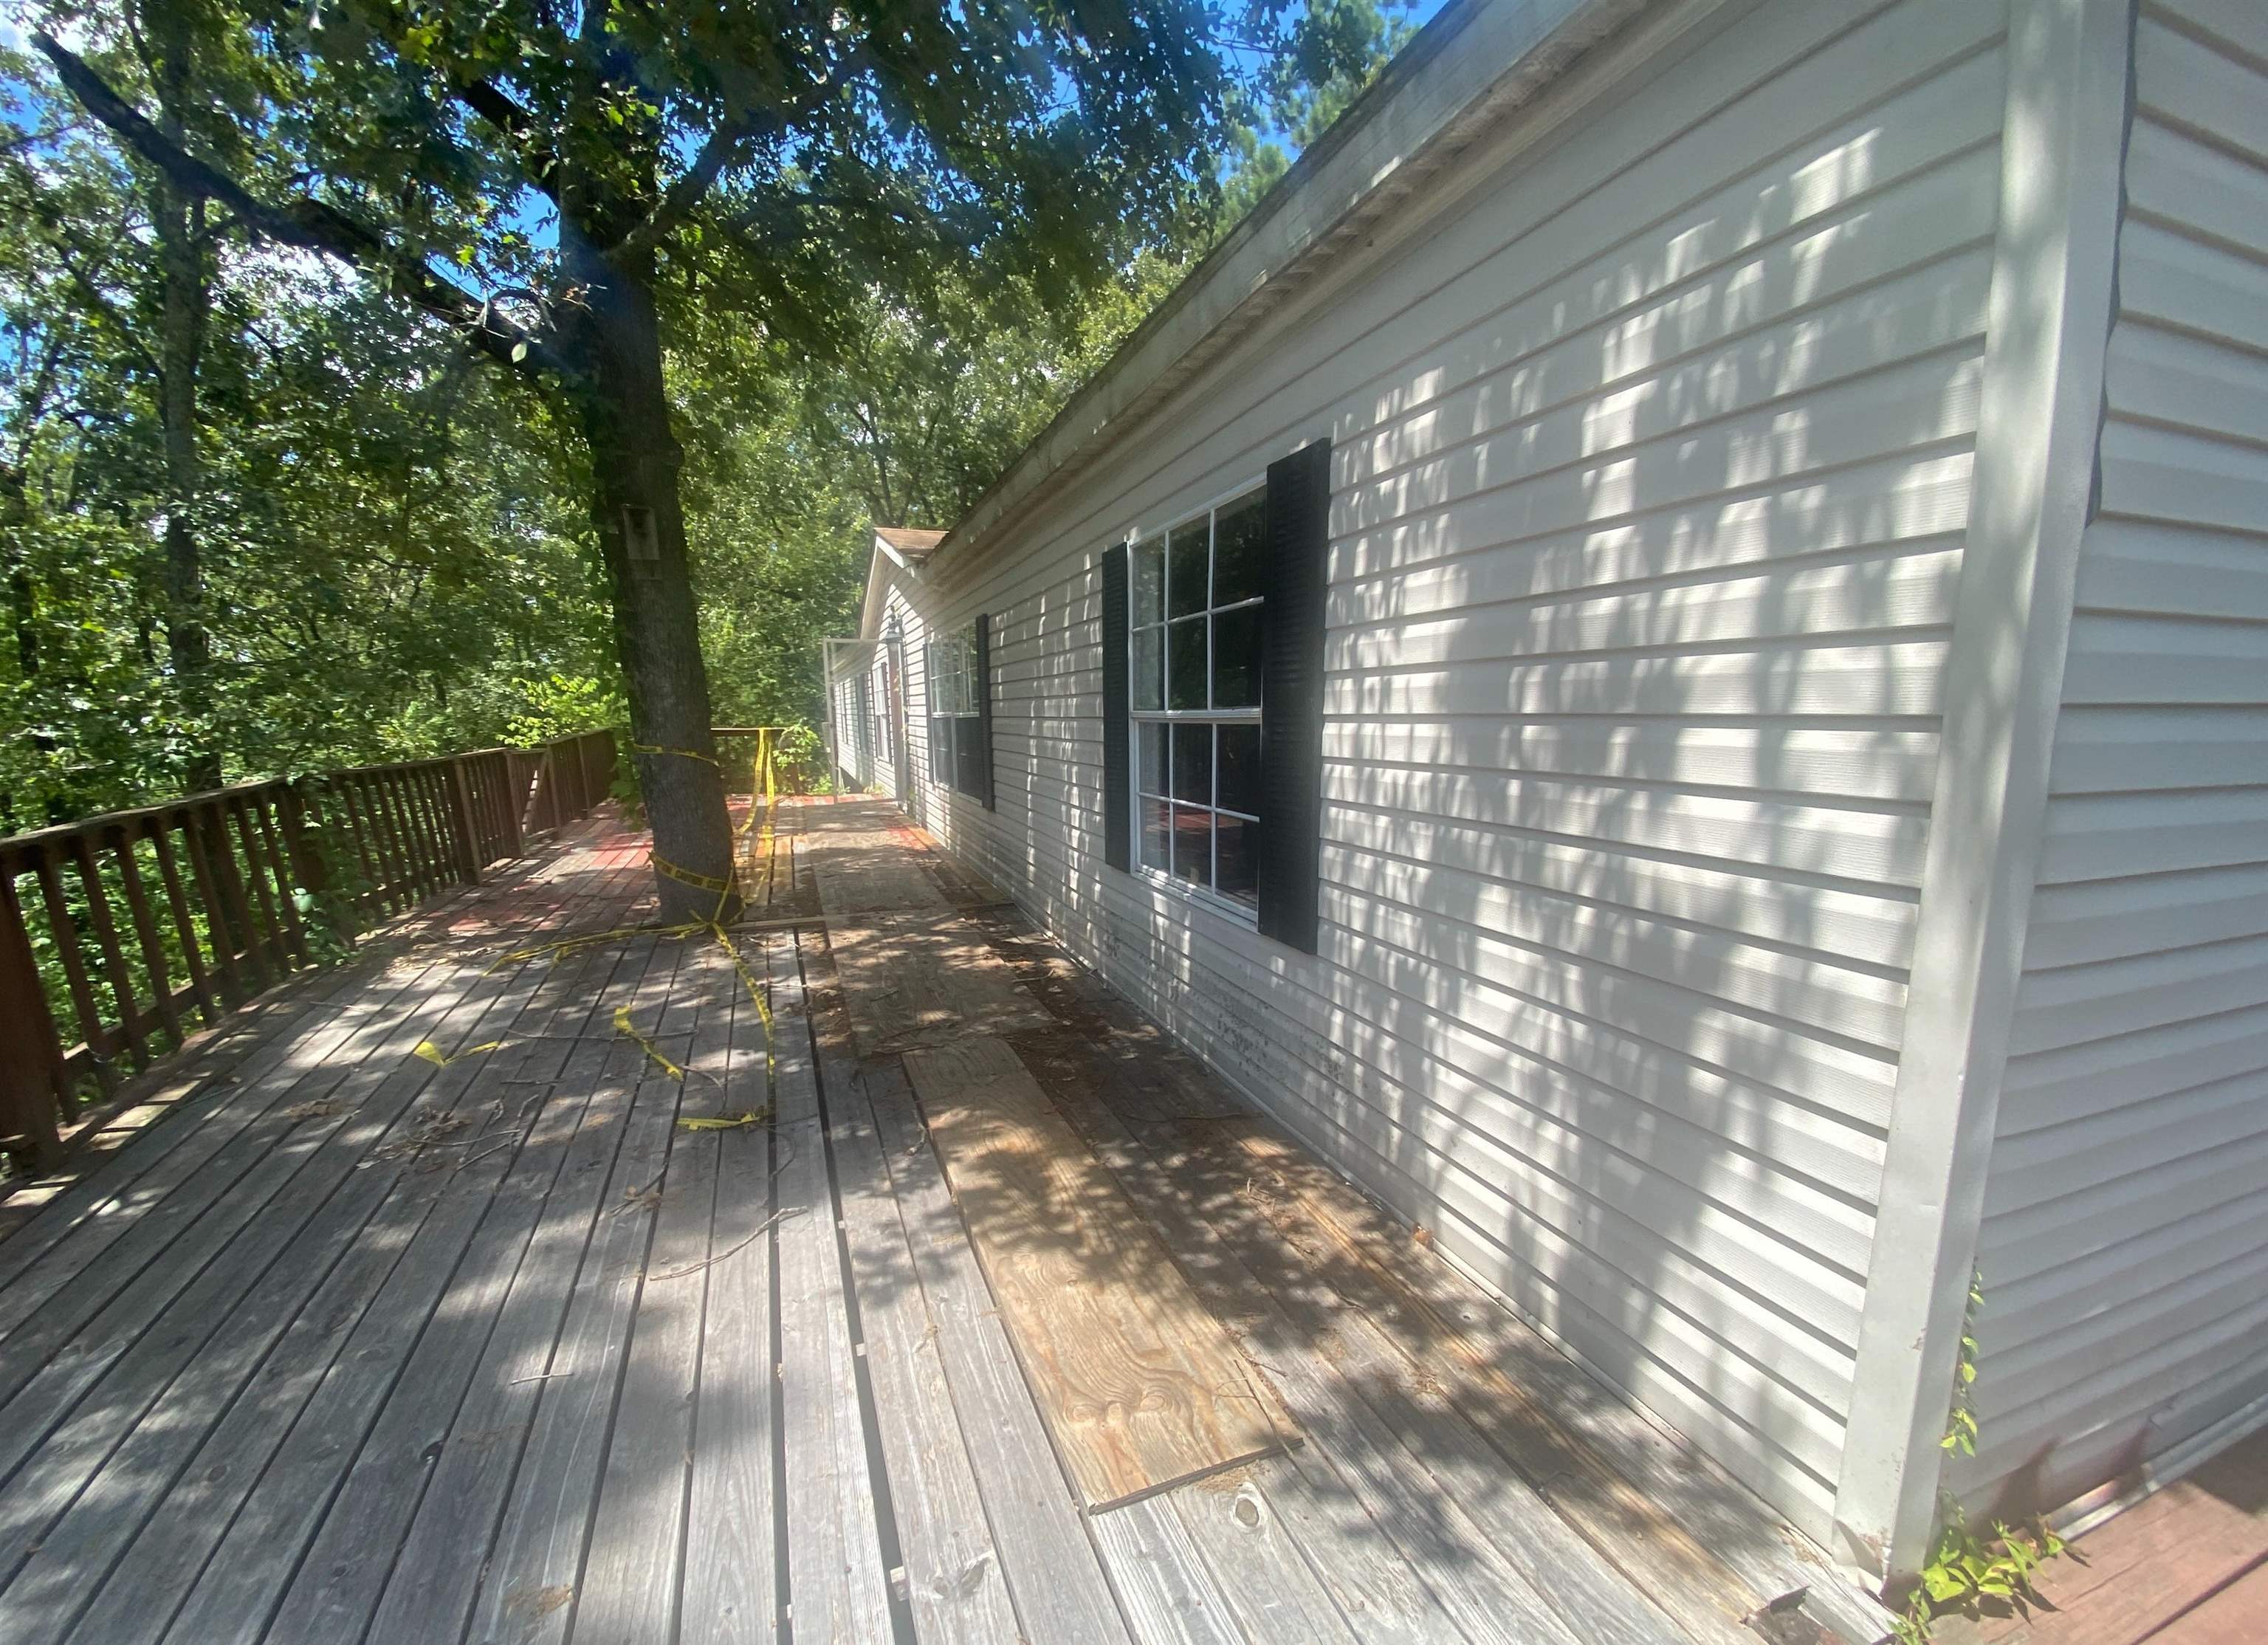 6 Gapview, Conway, AR 72032